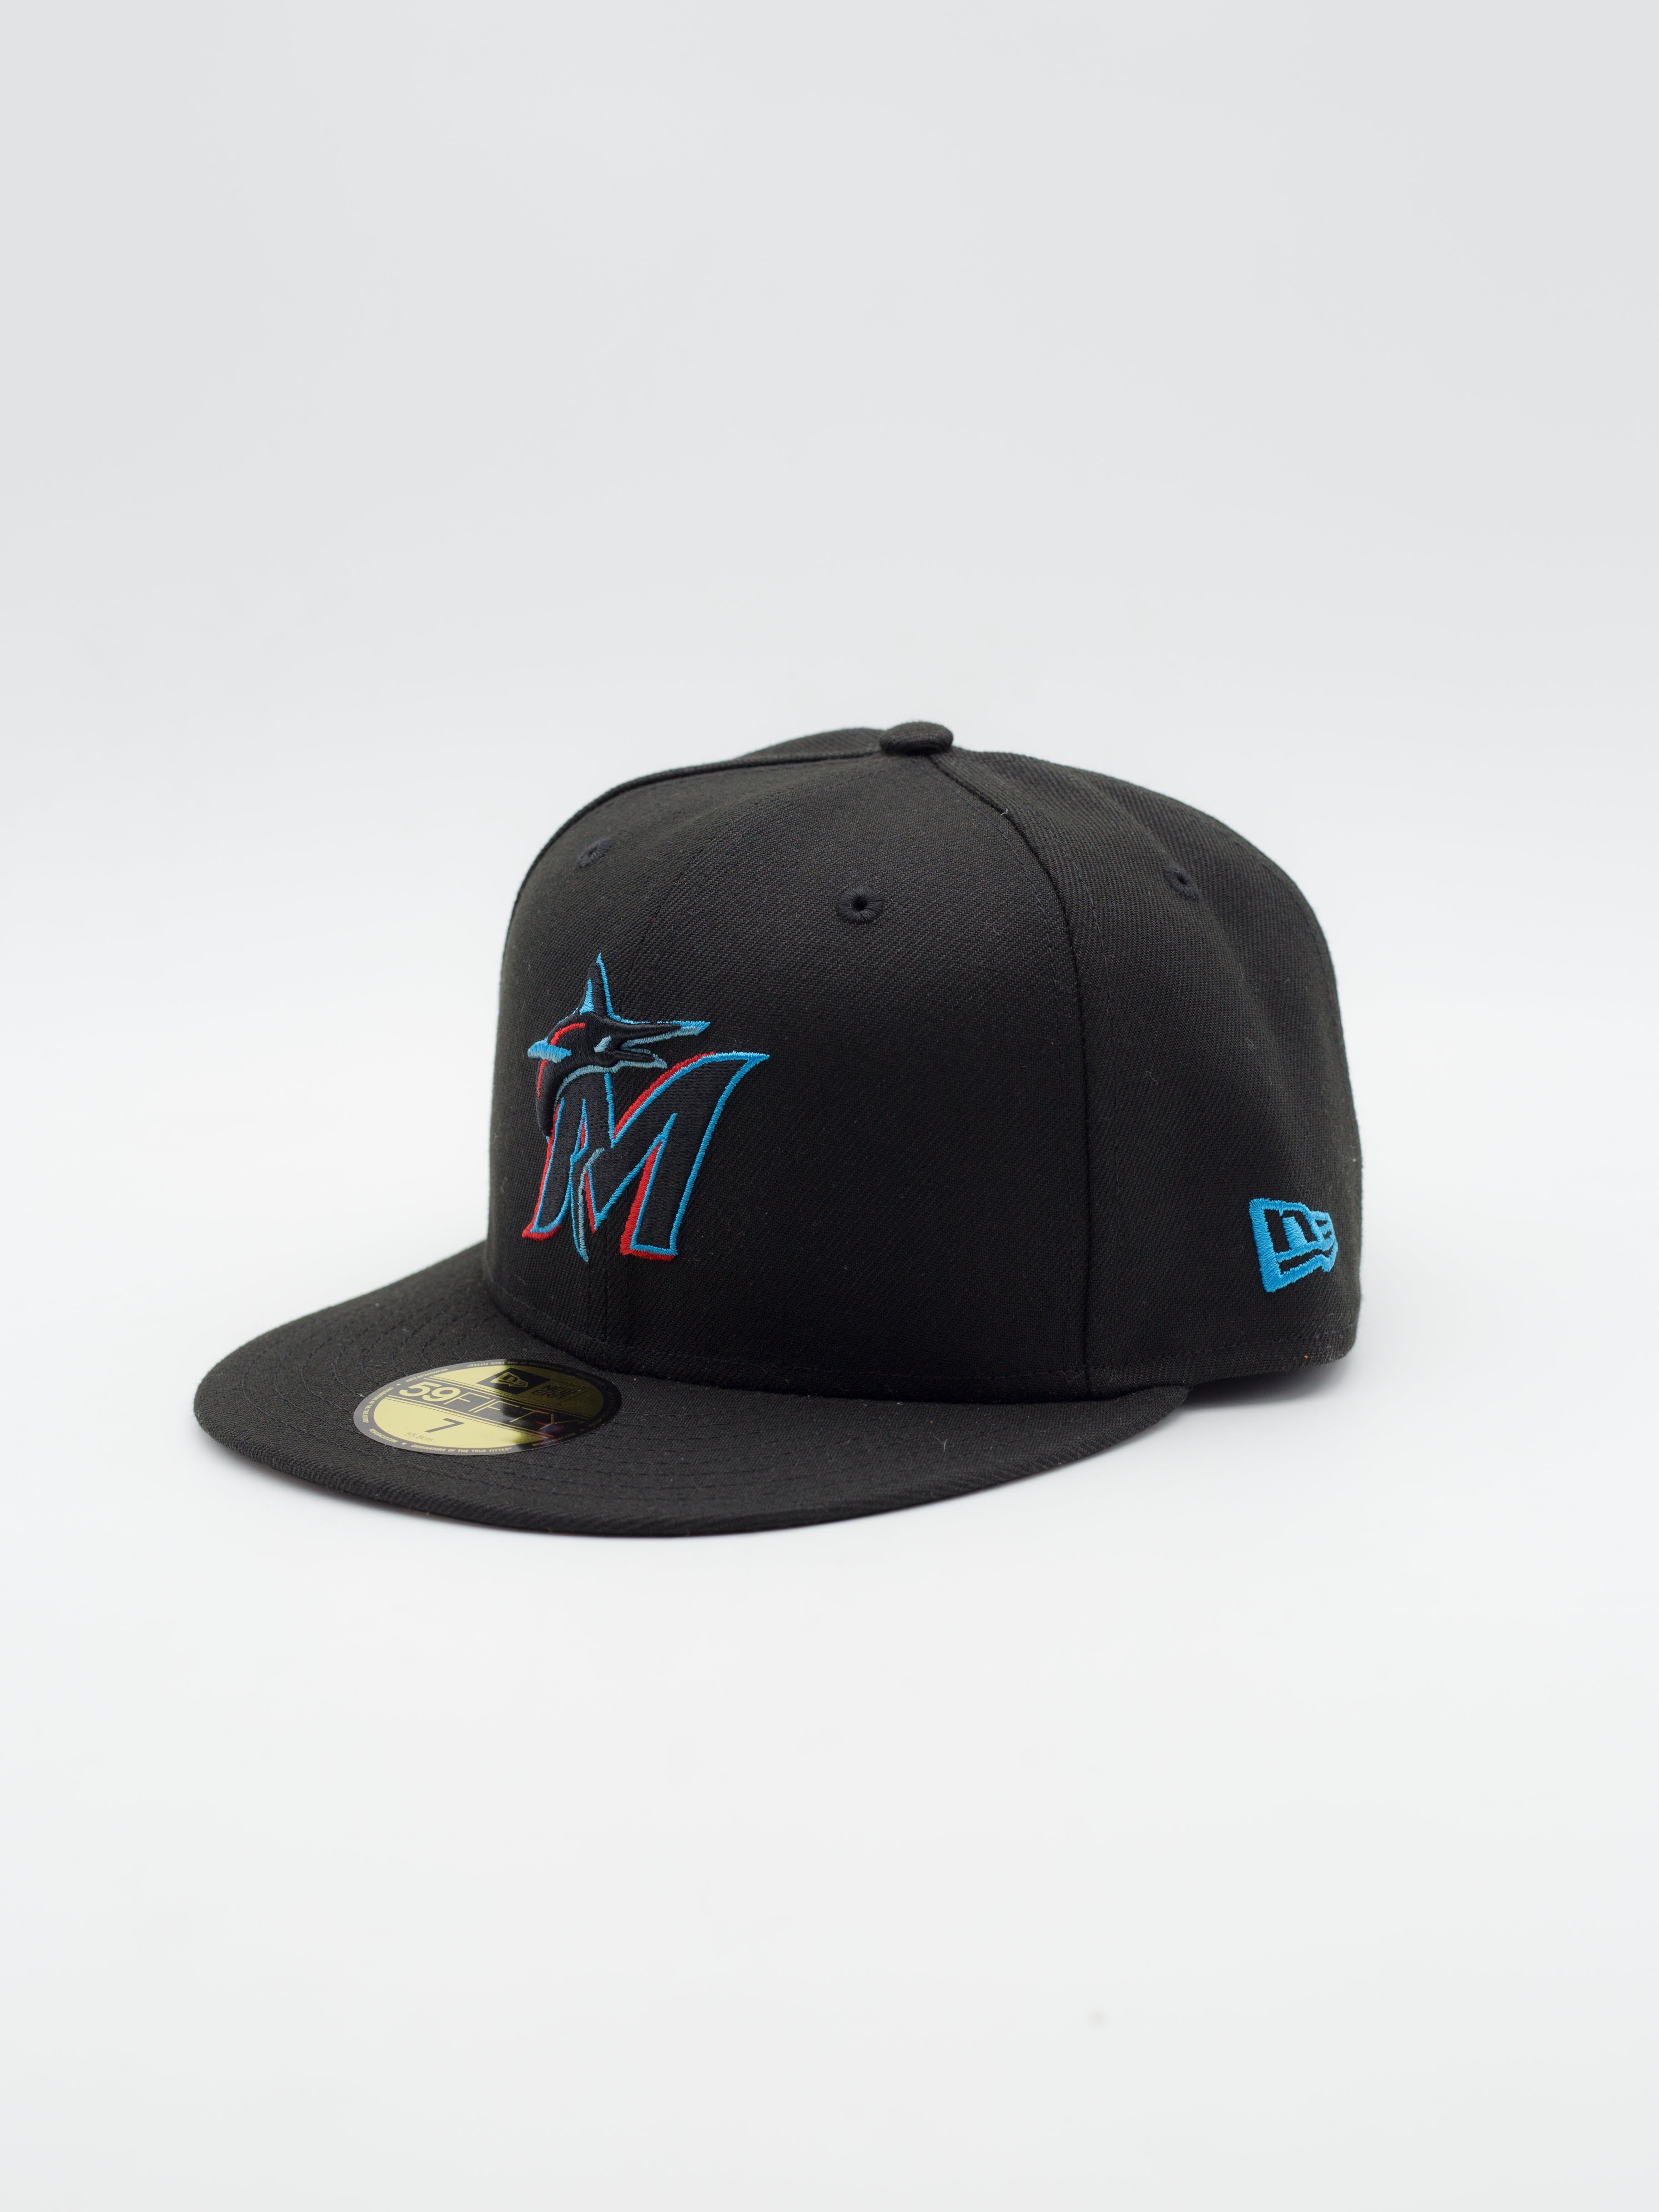 59FIFTY Authentic On Field Game Miami Marlins